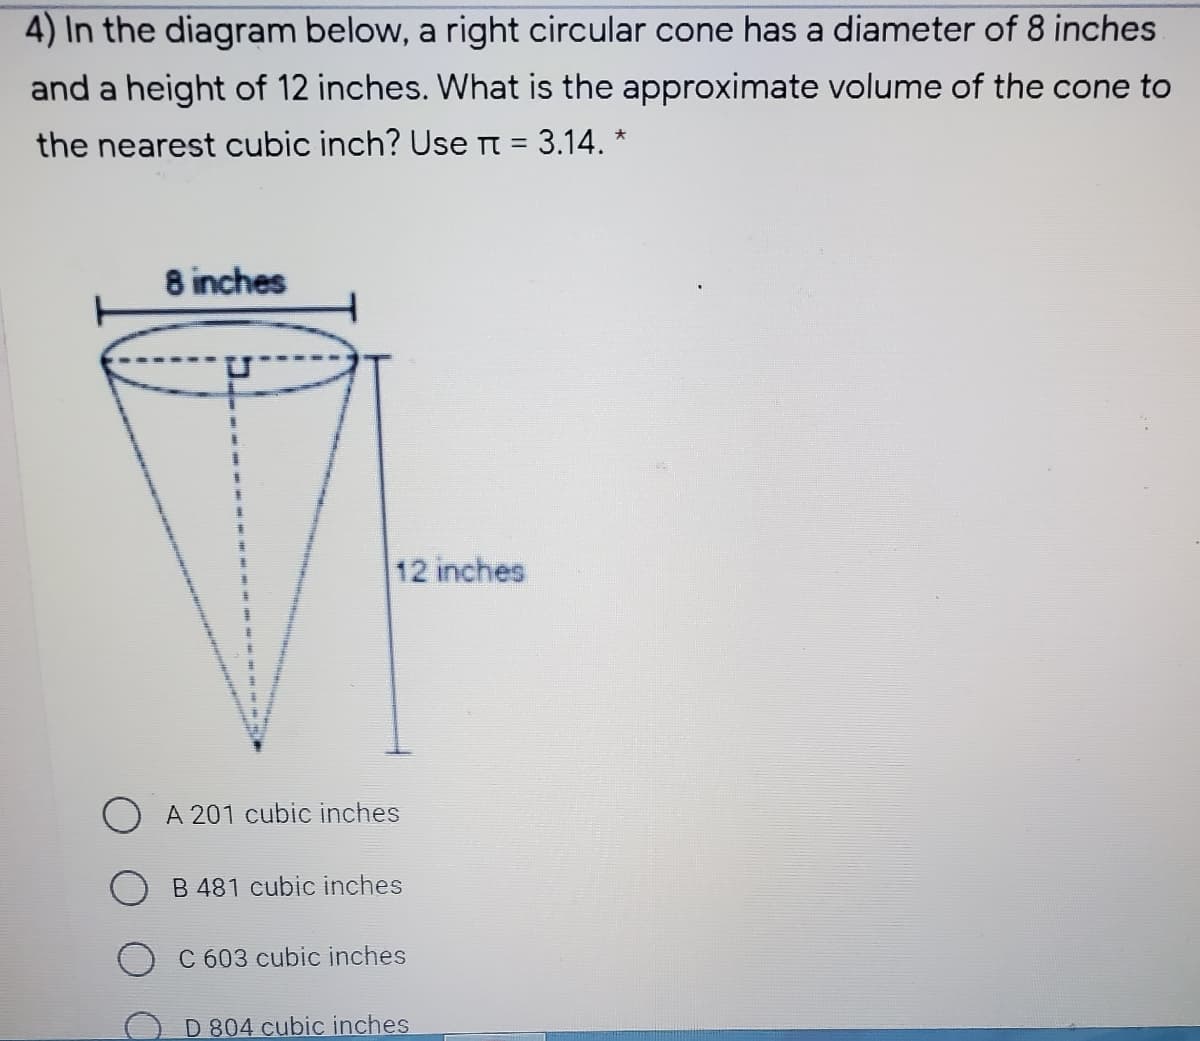 4) In the diagram below, a right circular cone has a diameter of 8 inches
and a height of 12 inches. What is the approximate volume of the cone to
the nearest cubic inch? Use n = 3.14. *
8 inches
12 inches
A 201 cubic inches
B 481 cubic inches
C 603 cubic inches
D 804 cubic inches
